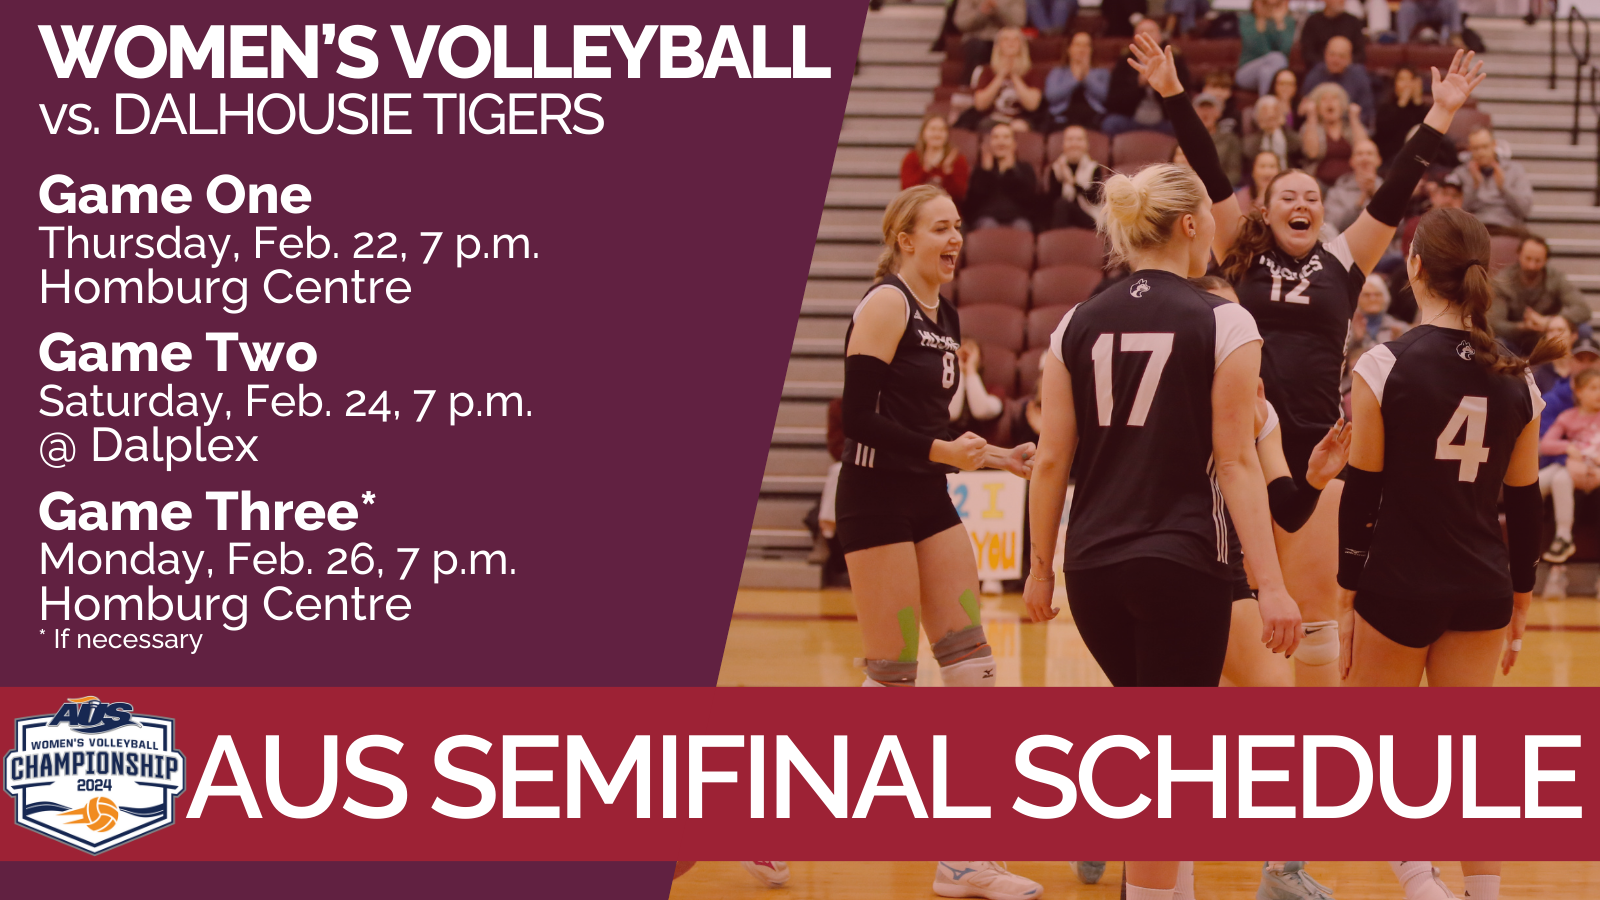 Schedule update: Huskies to take on Tigers in AUS Women's Volleyball Semifinal